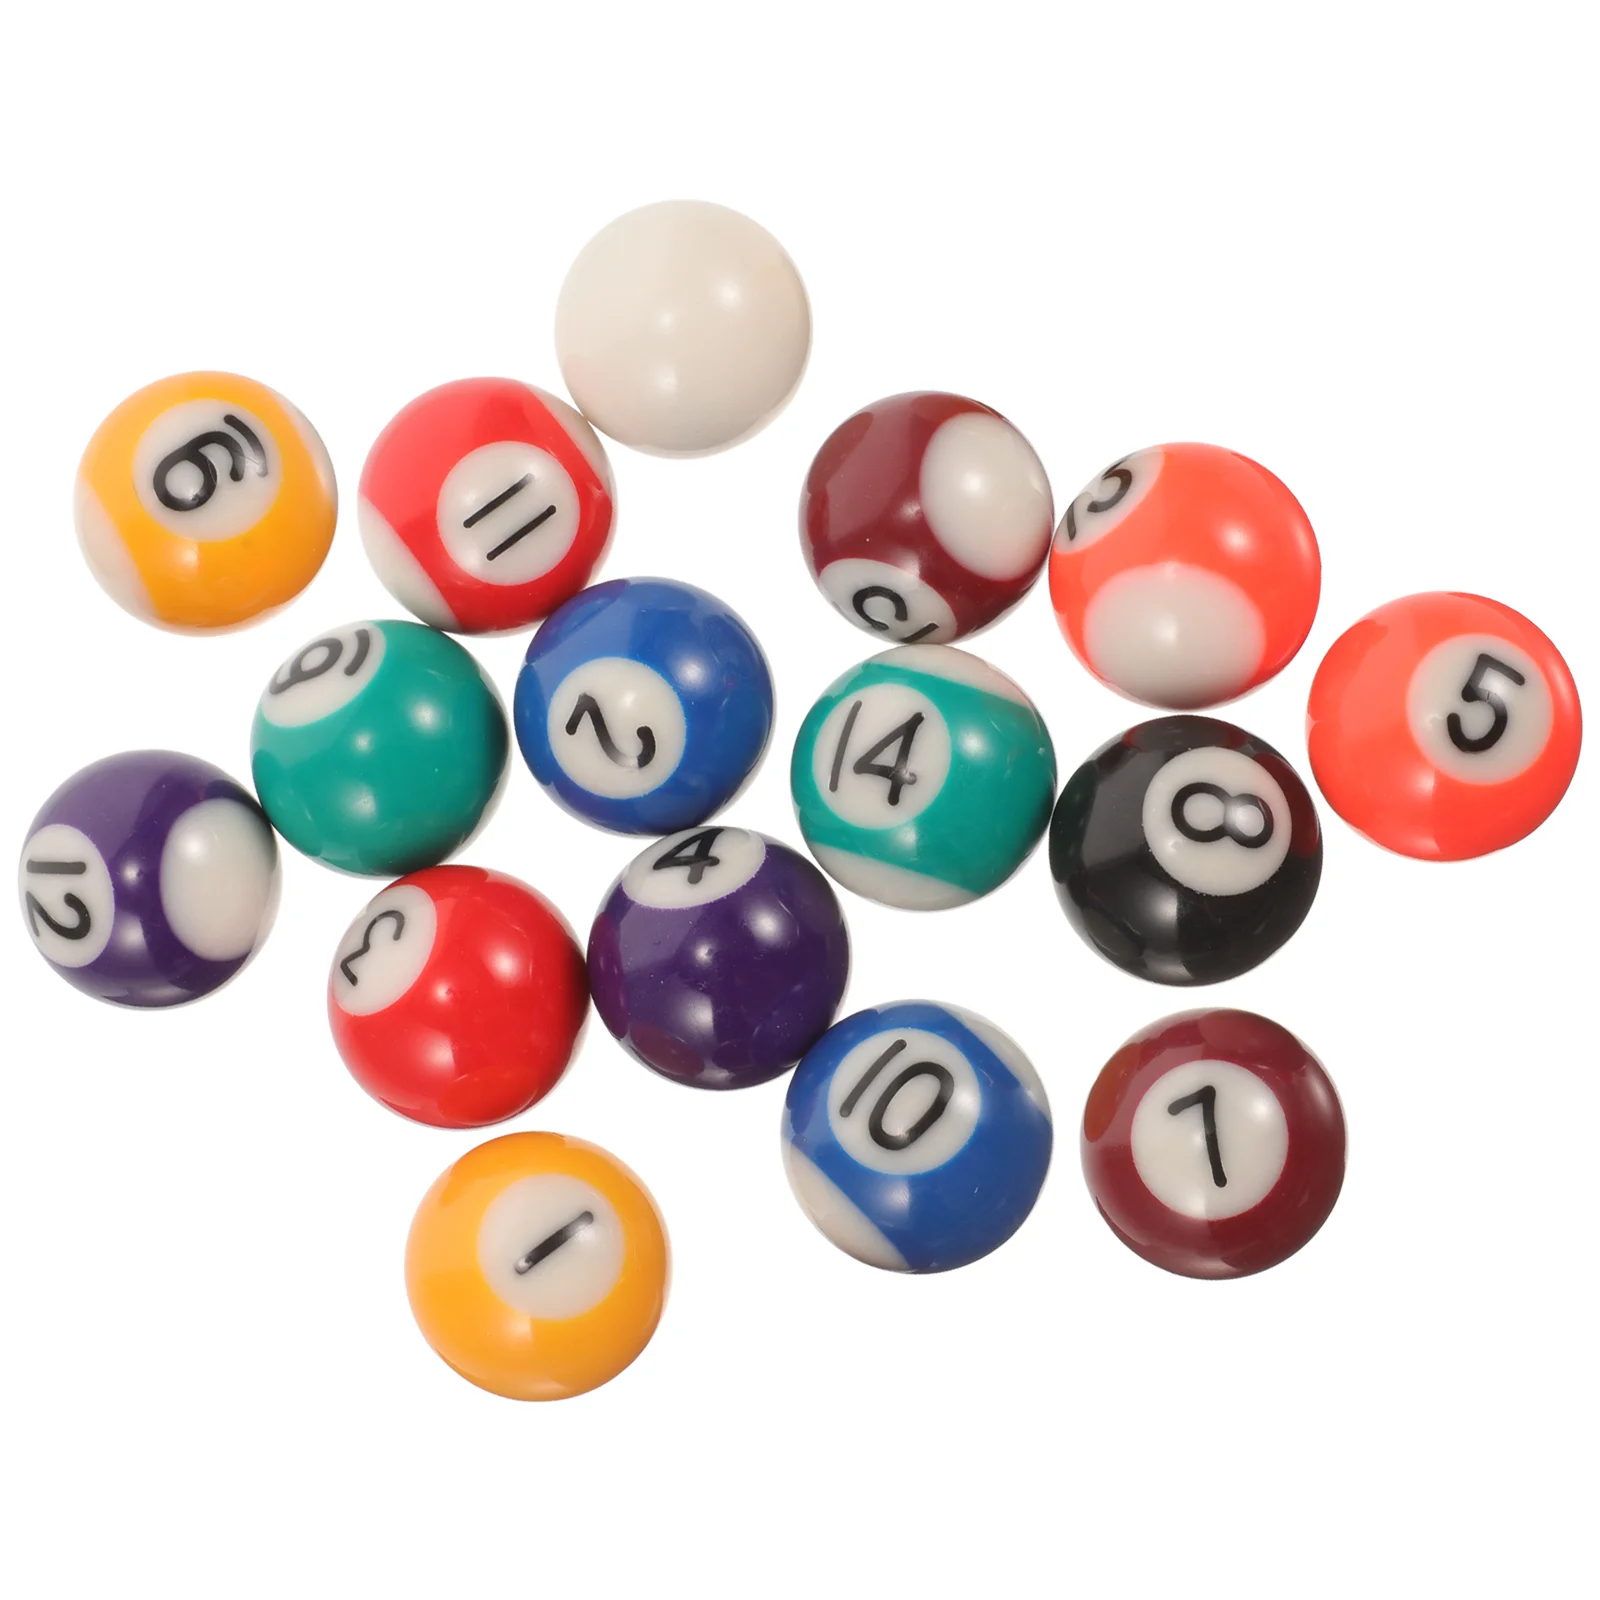 billiard cue ball cue balls accessory replace replaceable white pool table balls resin equipment wear resistant mixed style 1 Set of Miniature Billiard Ball Toys Replaceable Billiard Ball Toys Resin Pool Balls Billiard Necessity